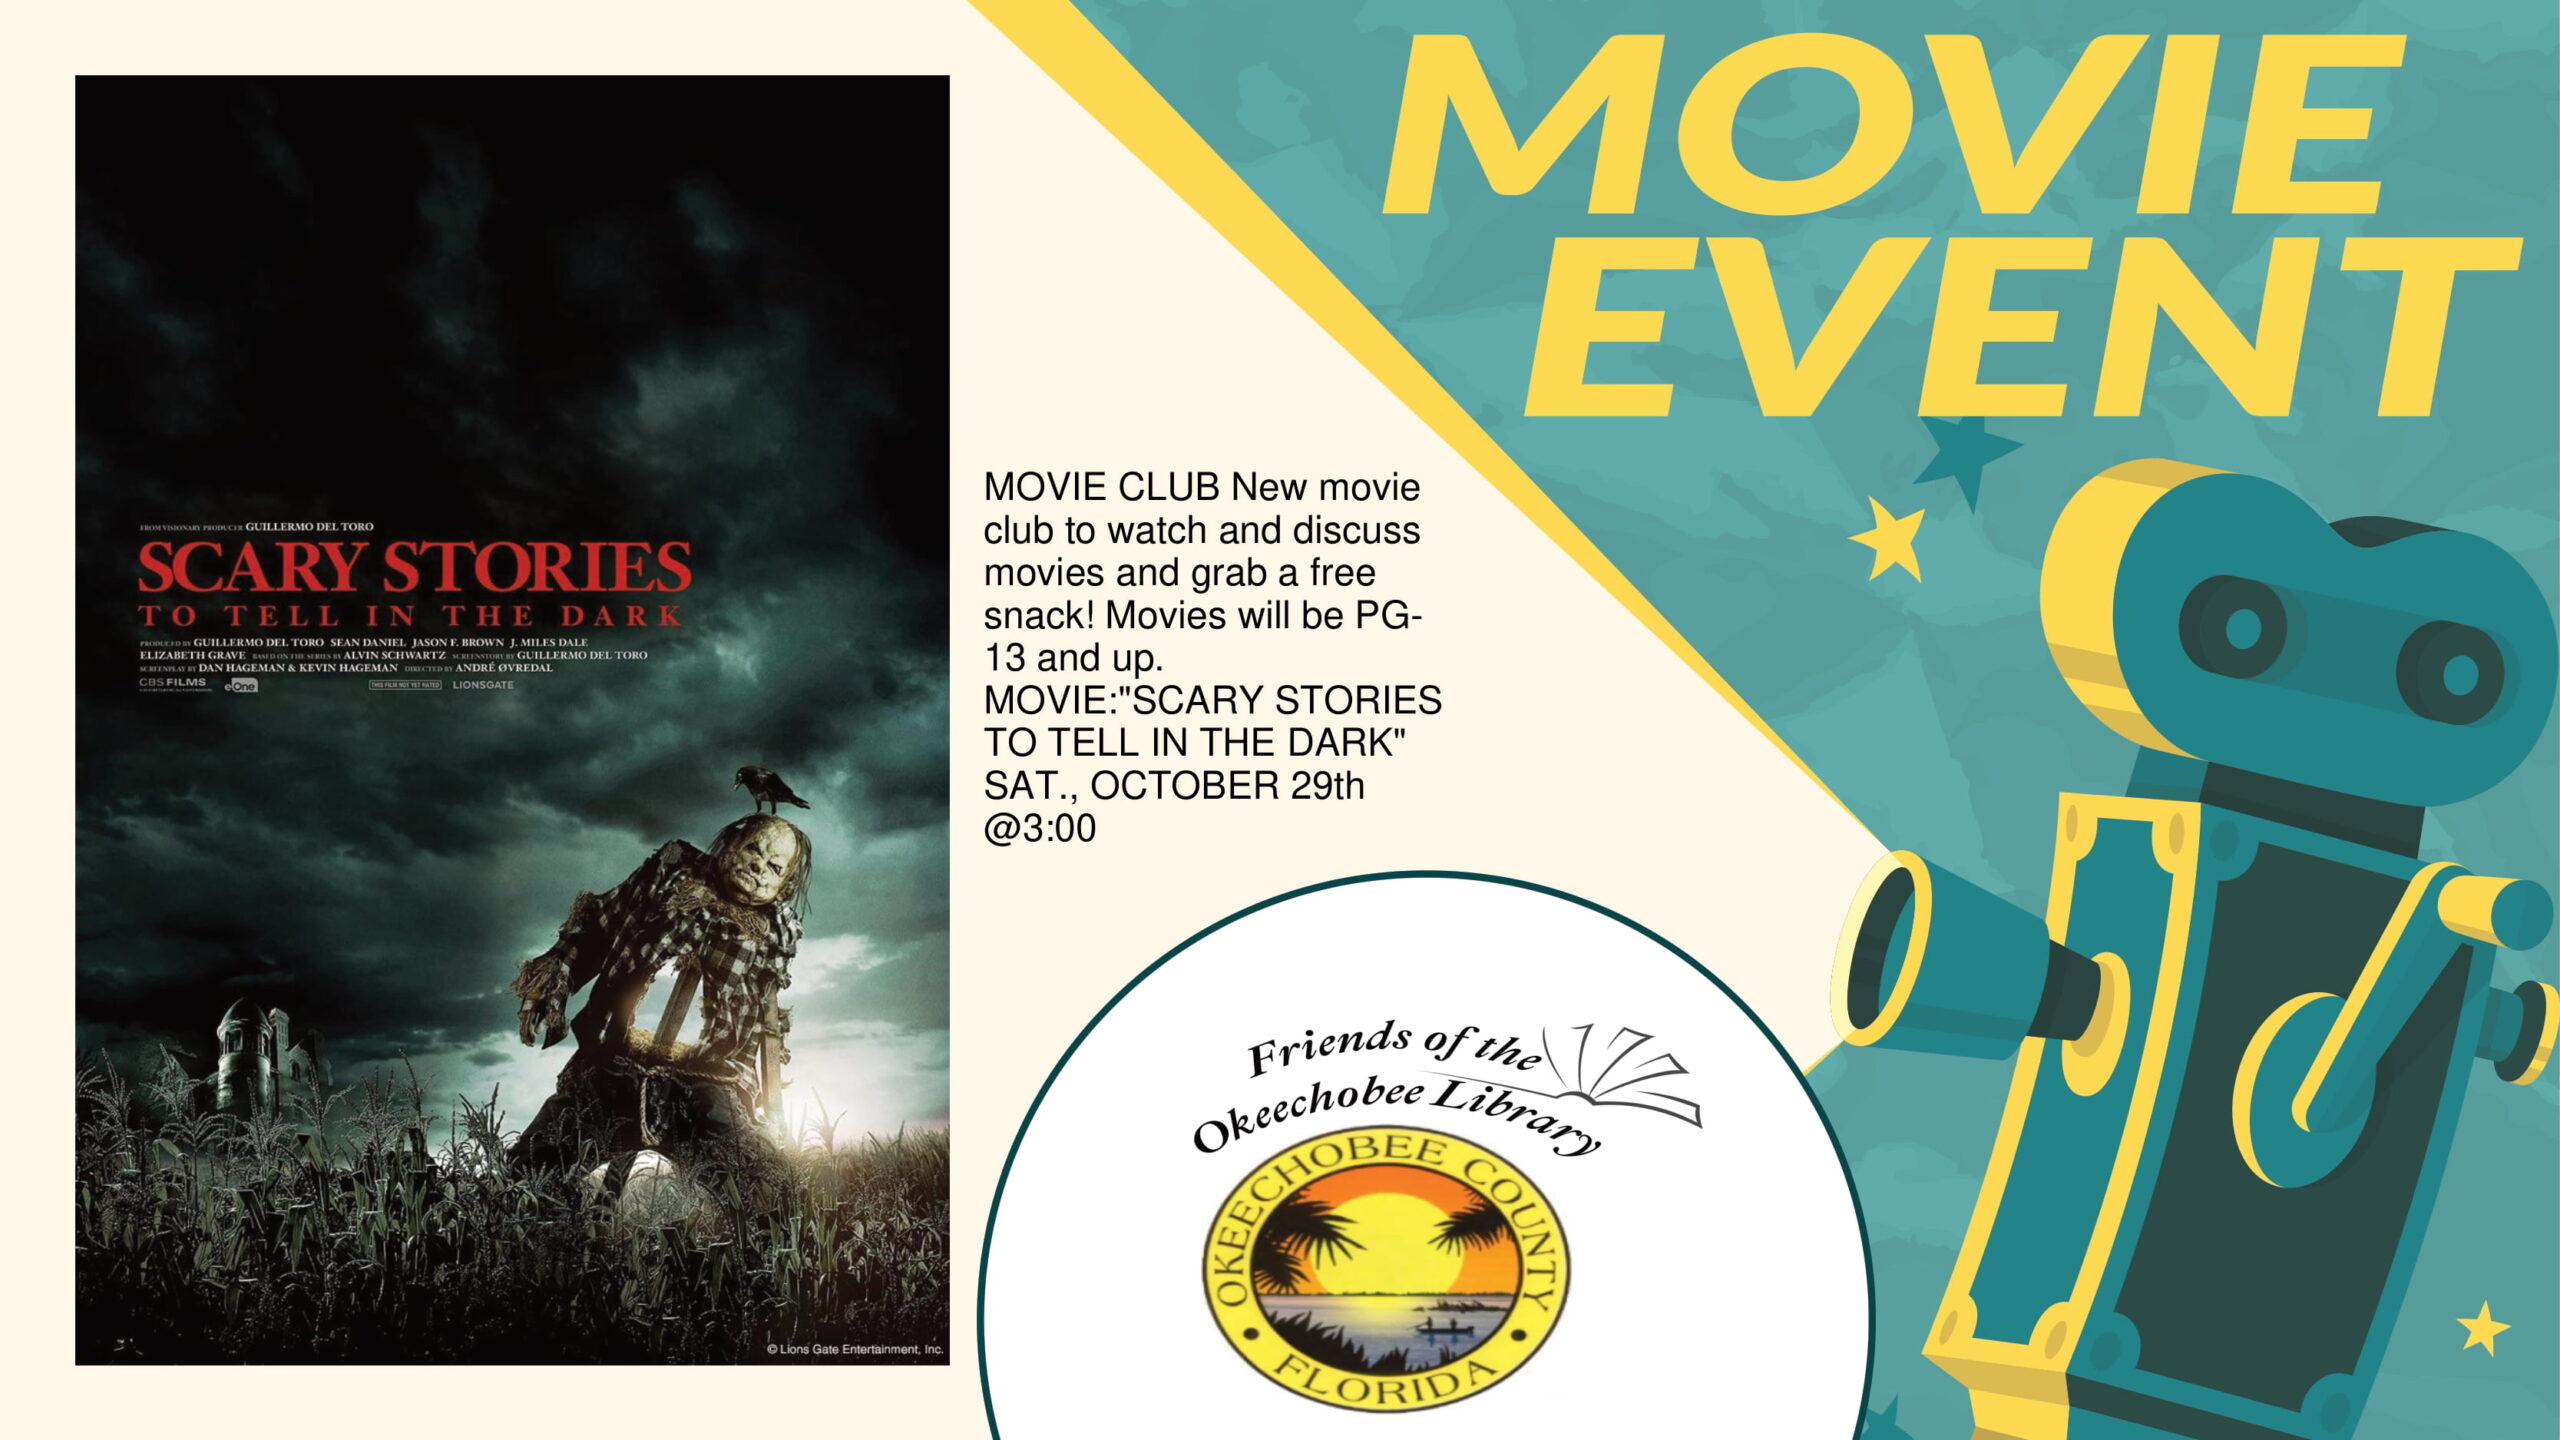 Join us for a FREE movie and snack at the Okeechobee Library! Our Movie Club event featuring Scary Stories To Tell In The Dark will be held on Saturday, October 29th!